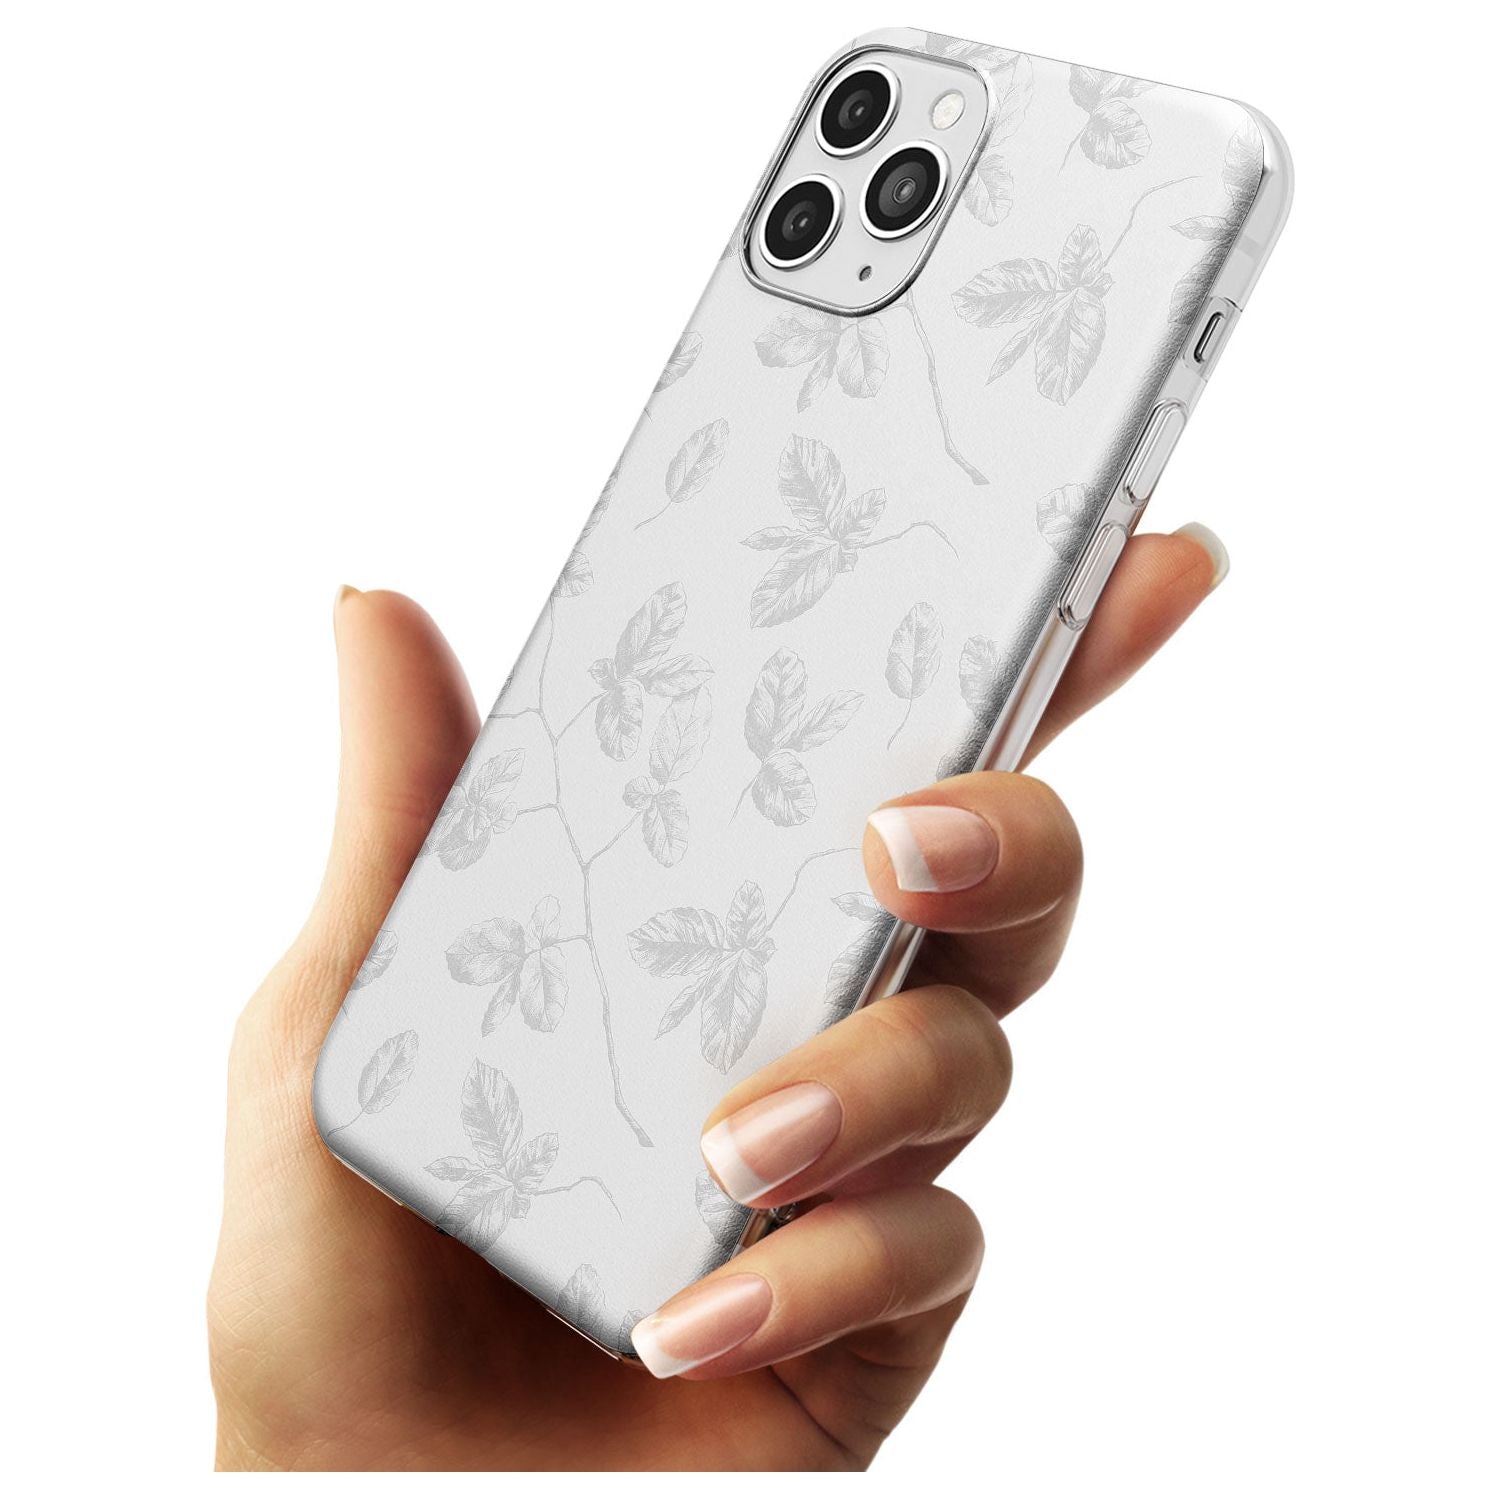 Grey Branches Vintage Botanical Slim TPU Phone Case for iPhone 11 Pro Max